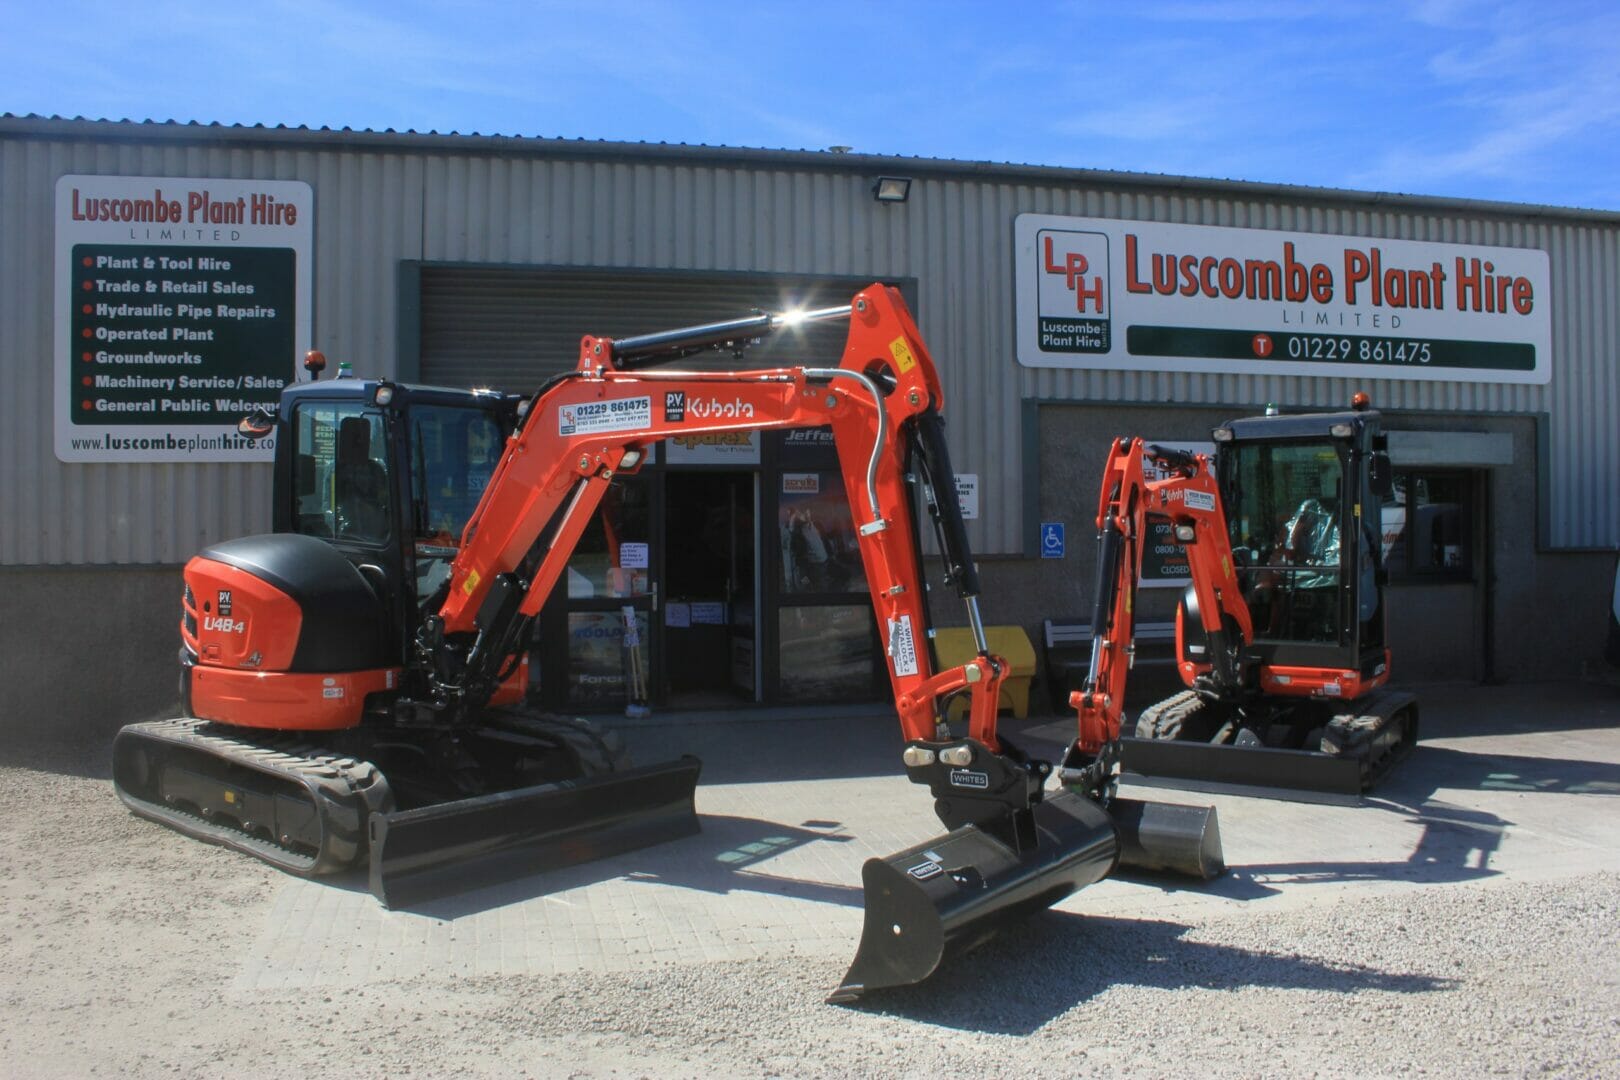 Customer demand drives Luscombe Plant Hire’s continued investment in Kubota